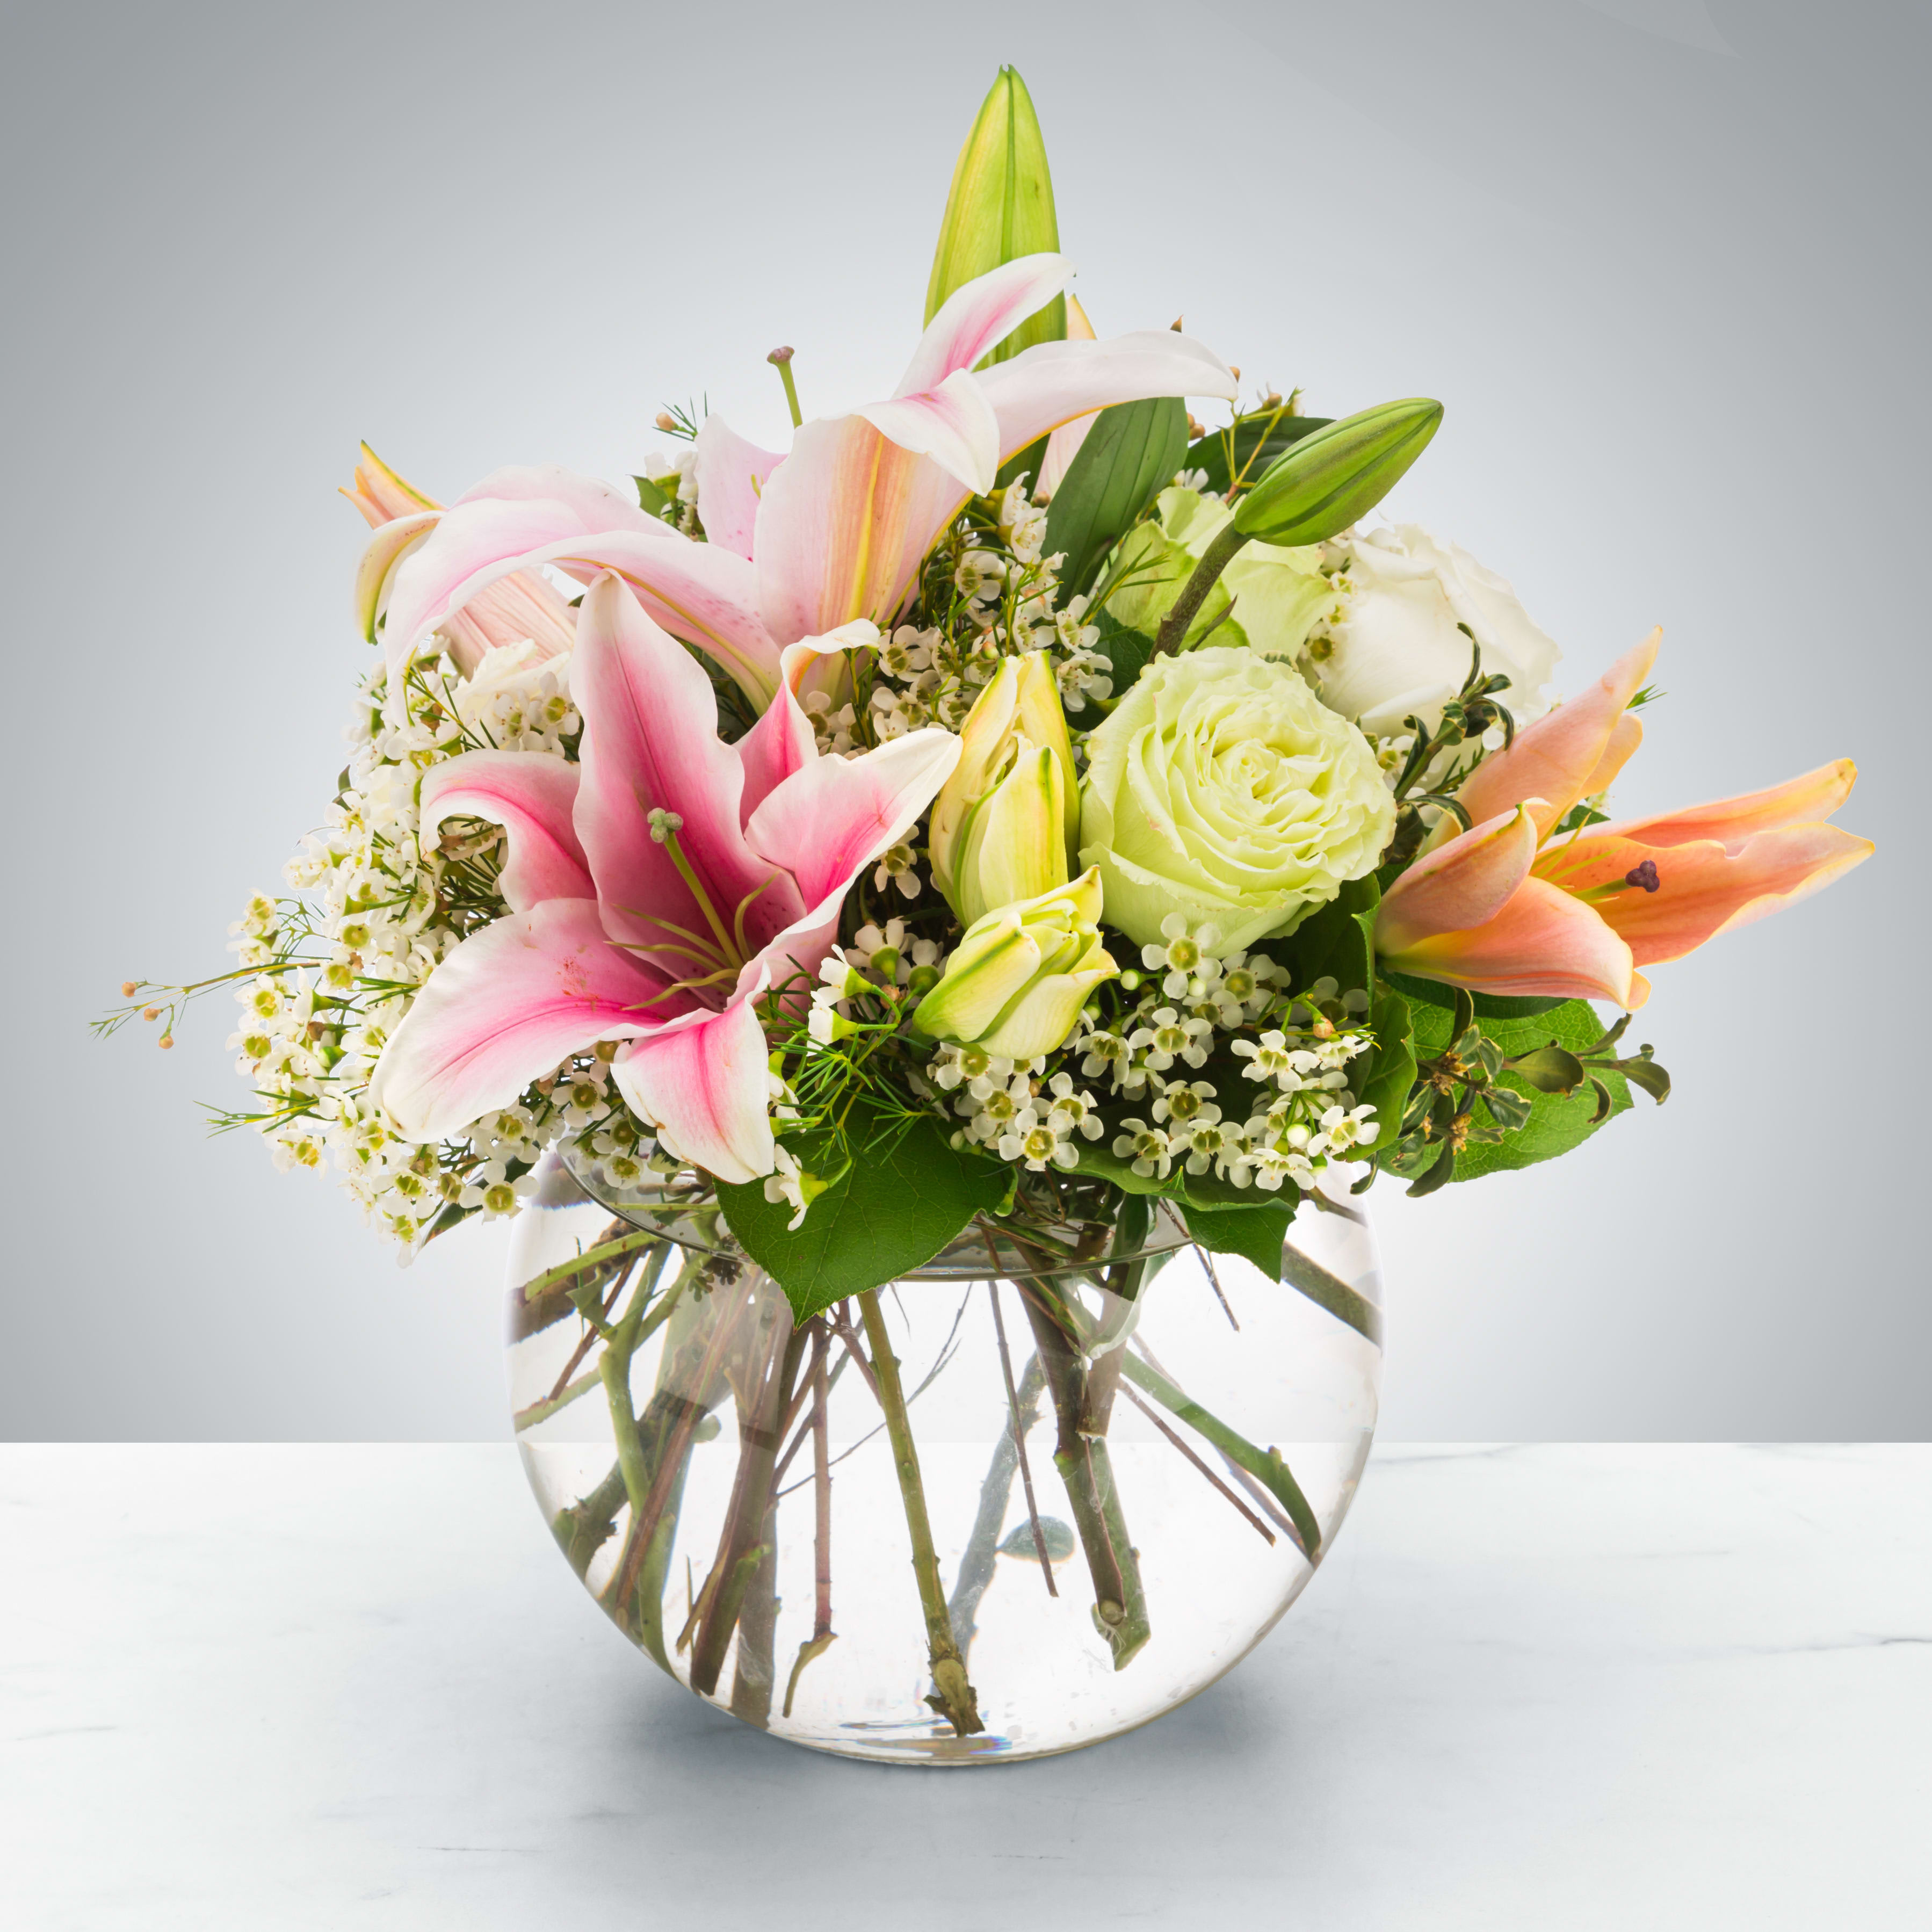 Polished Pearl  - A beautiful bubble arrangement, featuring pink lilies, white and green roses, and more, this arrangement is the perfect all-occasion gift. Pearls are the birthstone of June making this a great option for an early summer birthday!  Approximate Dimensions: 10''D x 13''H